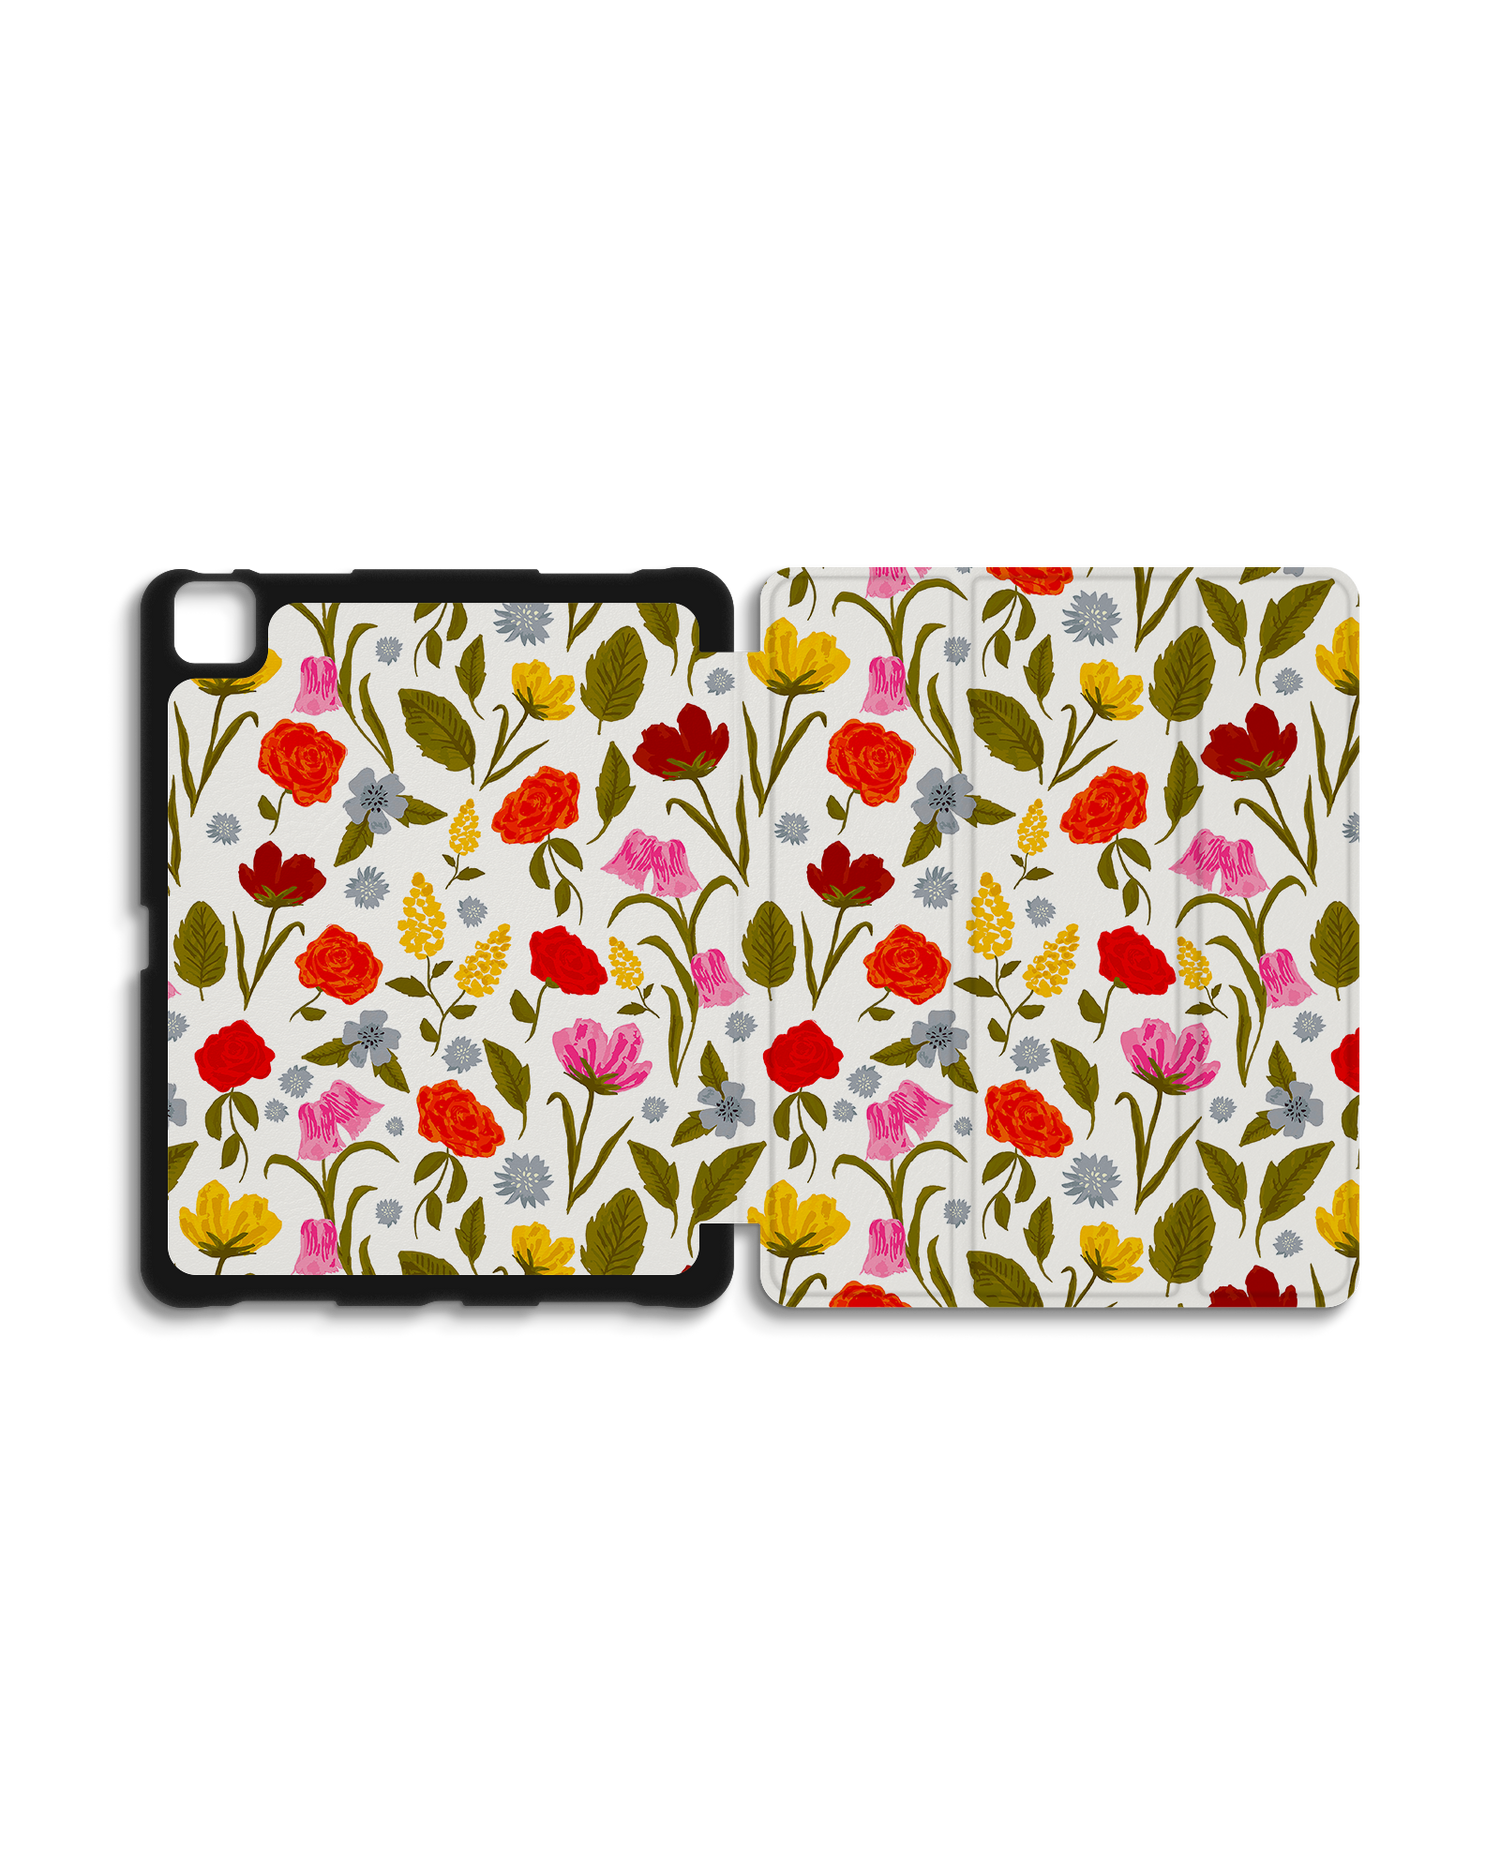 Botanical Beauties iPad Case with Pencil Holder for Apple iPad Pro 6 12.9